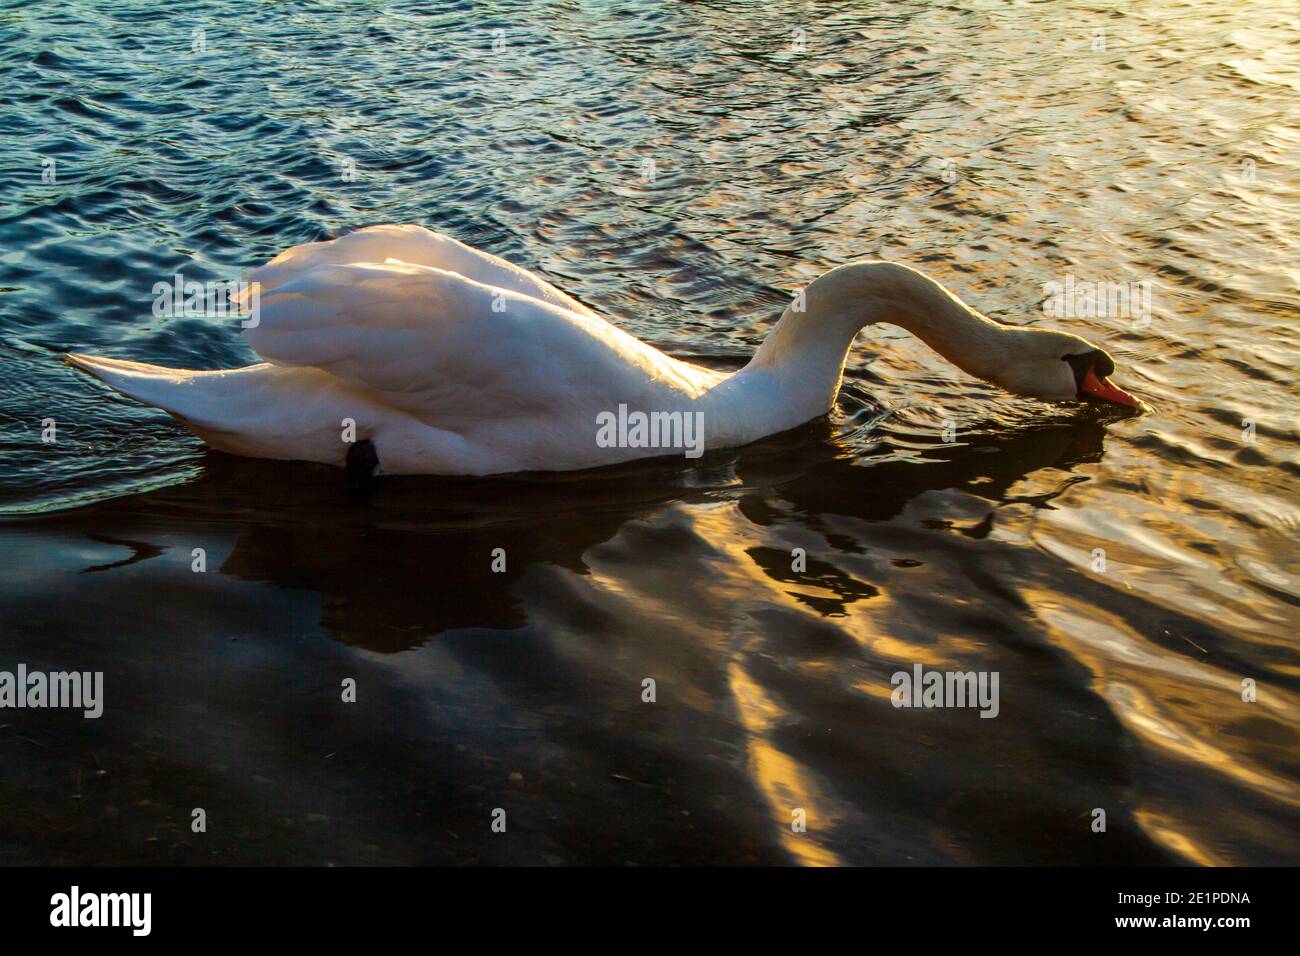 Mute swan, an introduced species to North America.  This adult is skimming the salt water for food.  It is a very large and graceful bird. Stock Photo